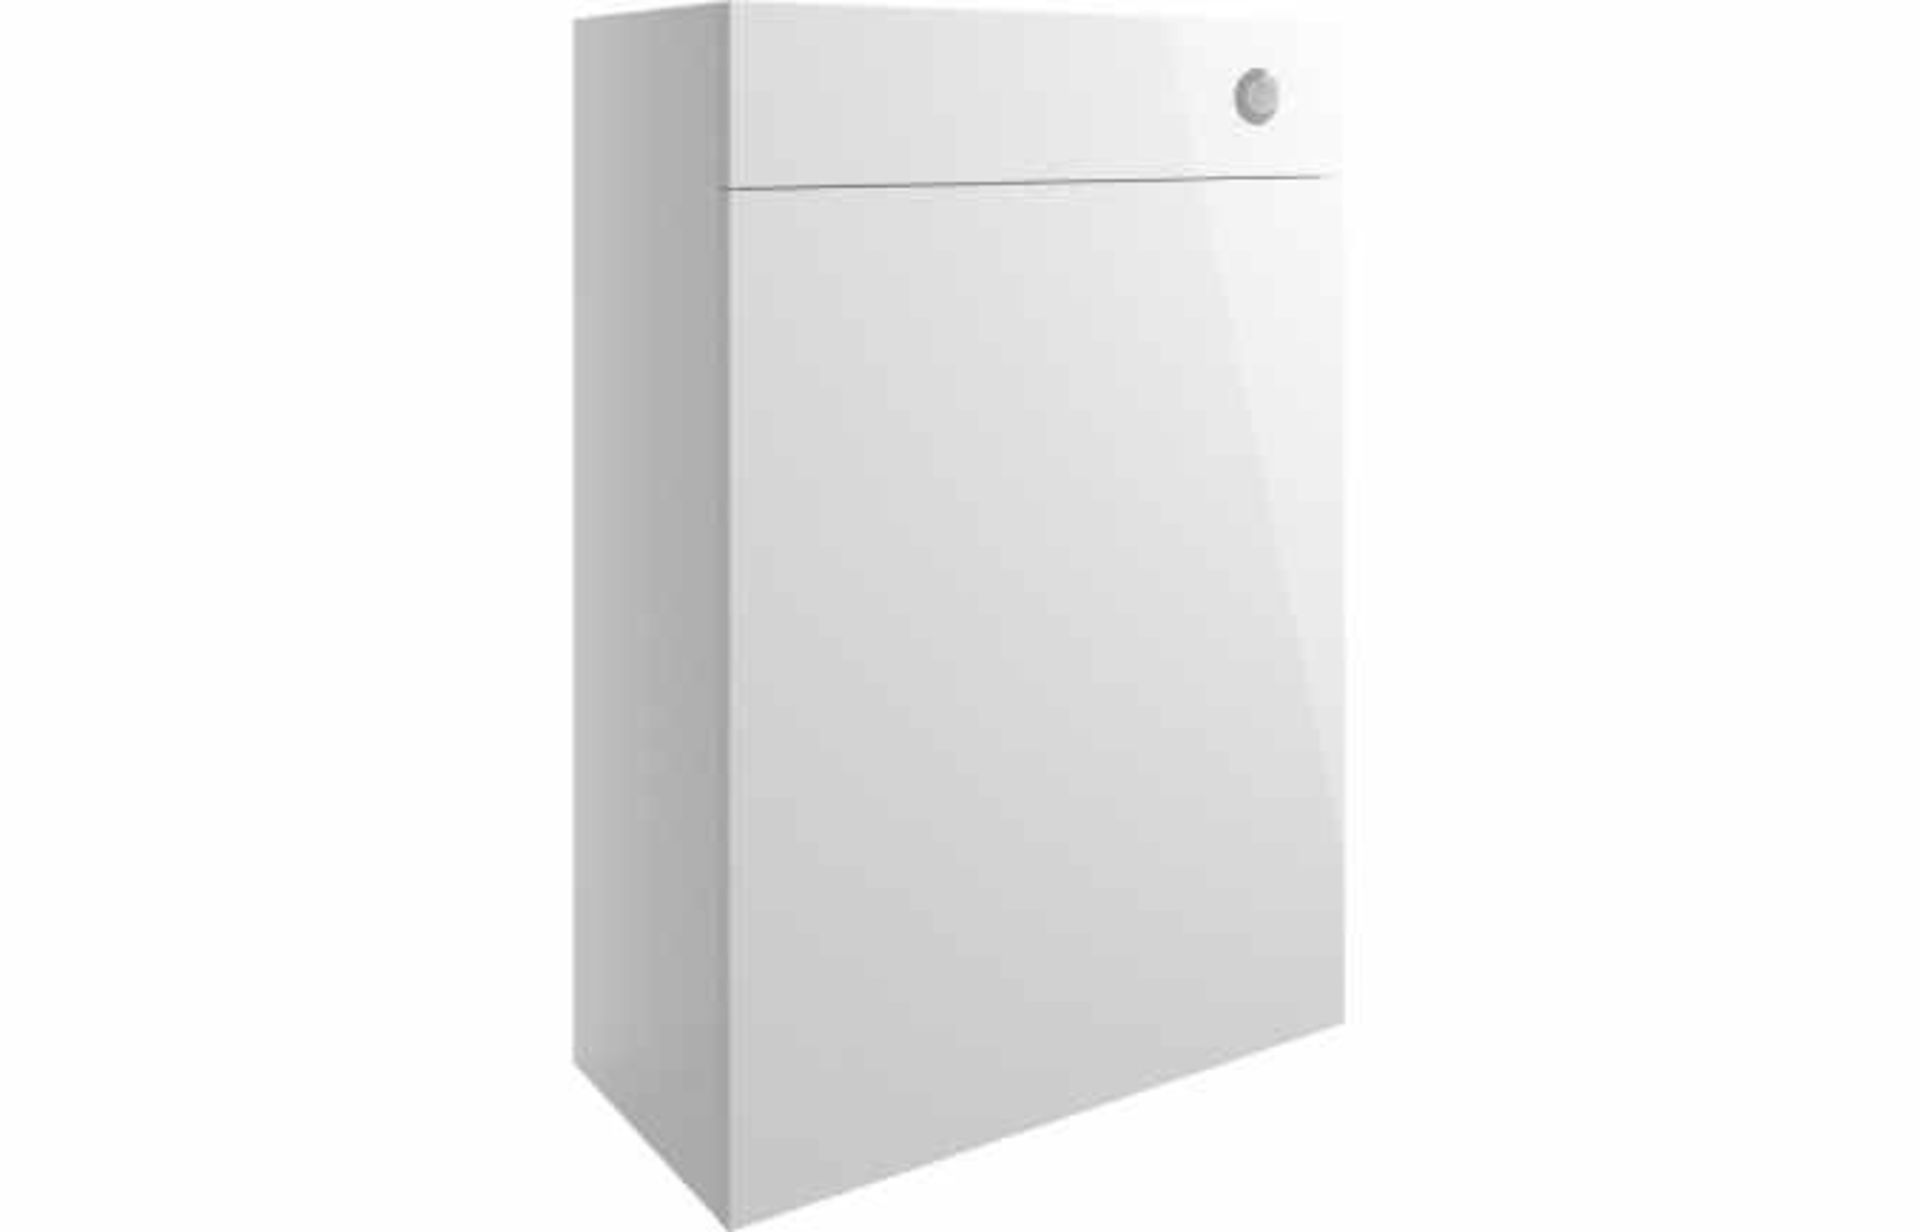 New (W239) 600mm - Valesso Wc Unit - White Gloss RRP £255 Toilet Unit From The Valesso Range O...